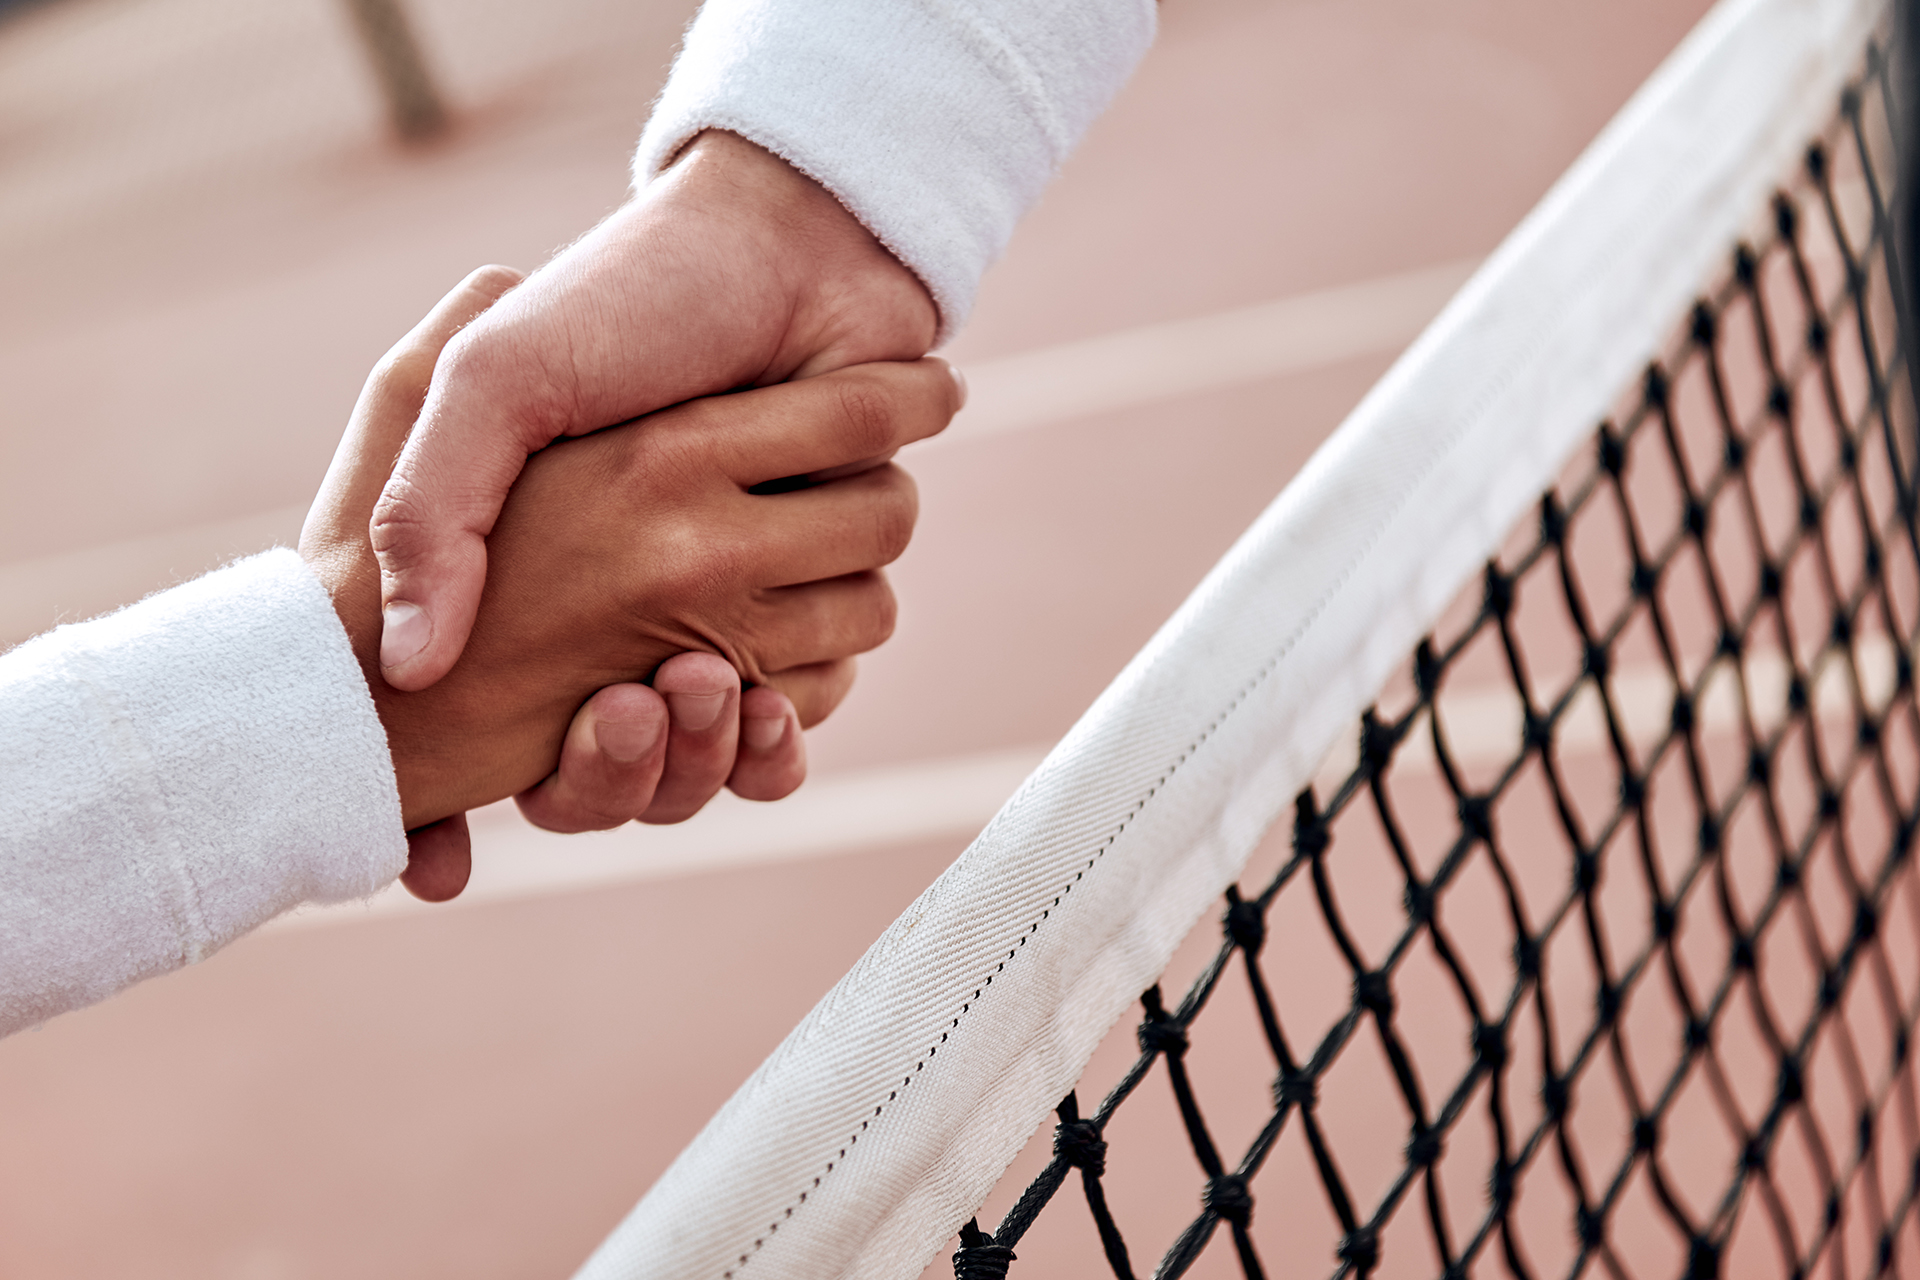 Two tennis players are shaking hands